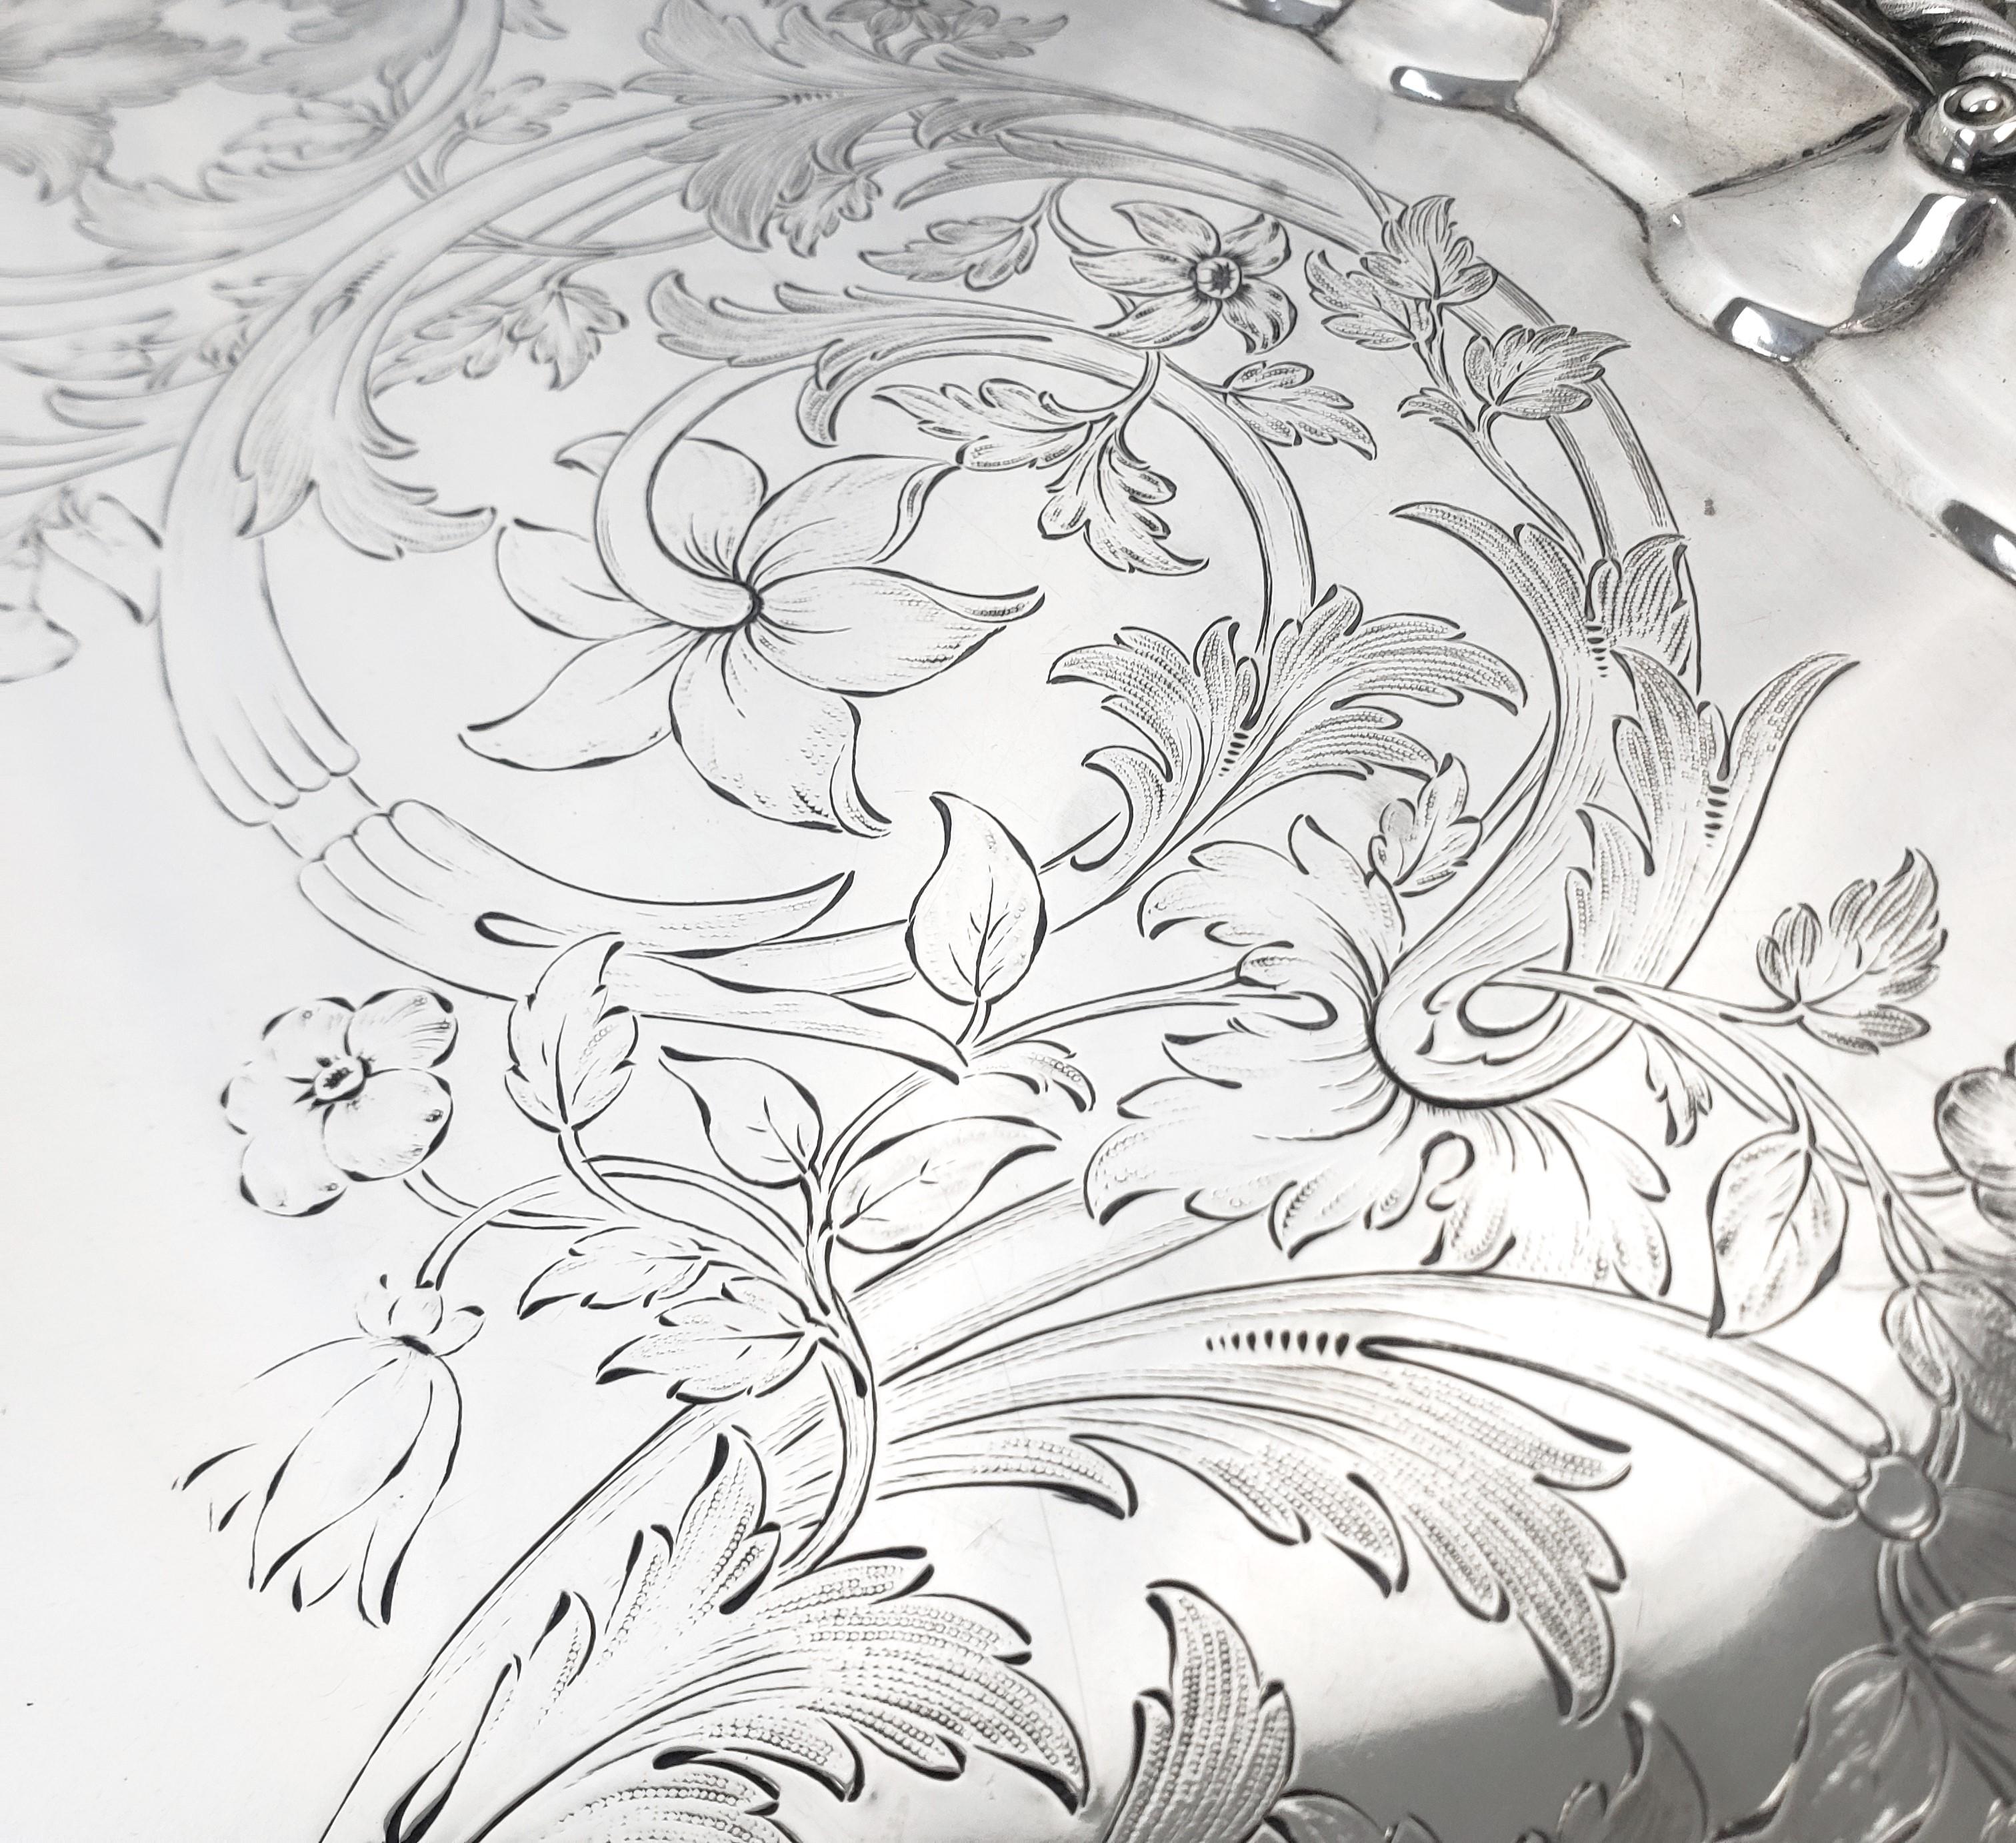 Huge Antique Sterling Silver Salver or Footed Tray with Ornate Floral Engraving For Sale 3